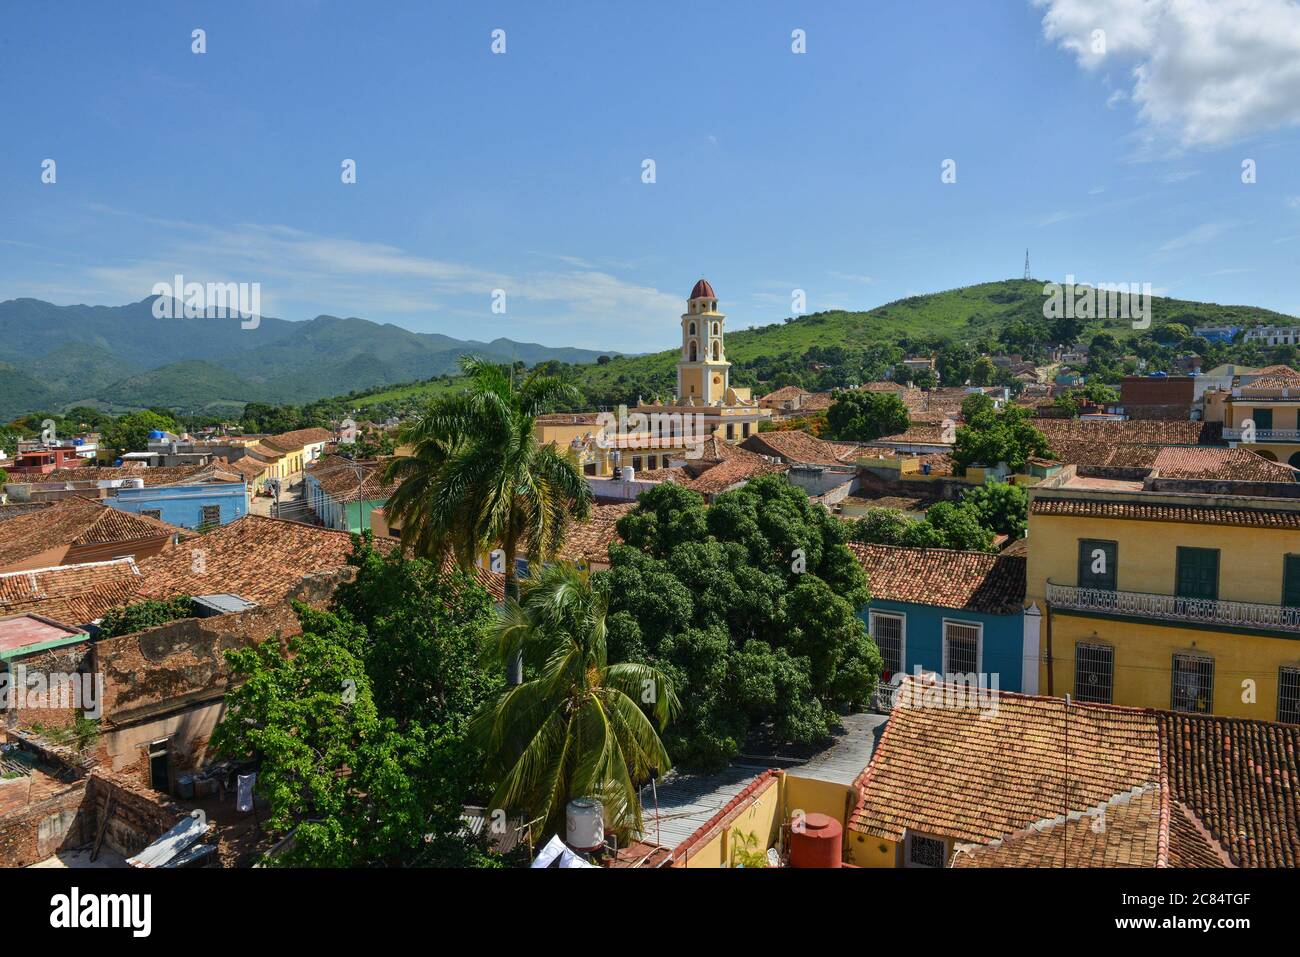 Cuba, Sancti Spiritus Province: Trinidad. Overview of the tiled roofs of houses in the city and the bell tower of the Church of Francis of Assisi (Igl Stock Photo